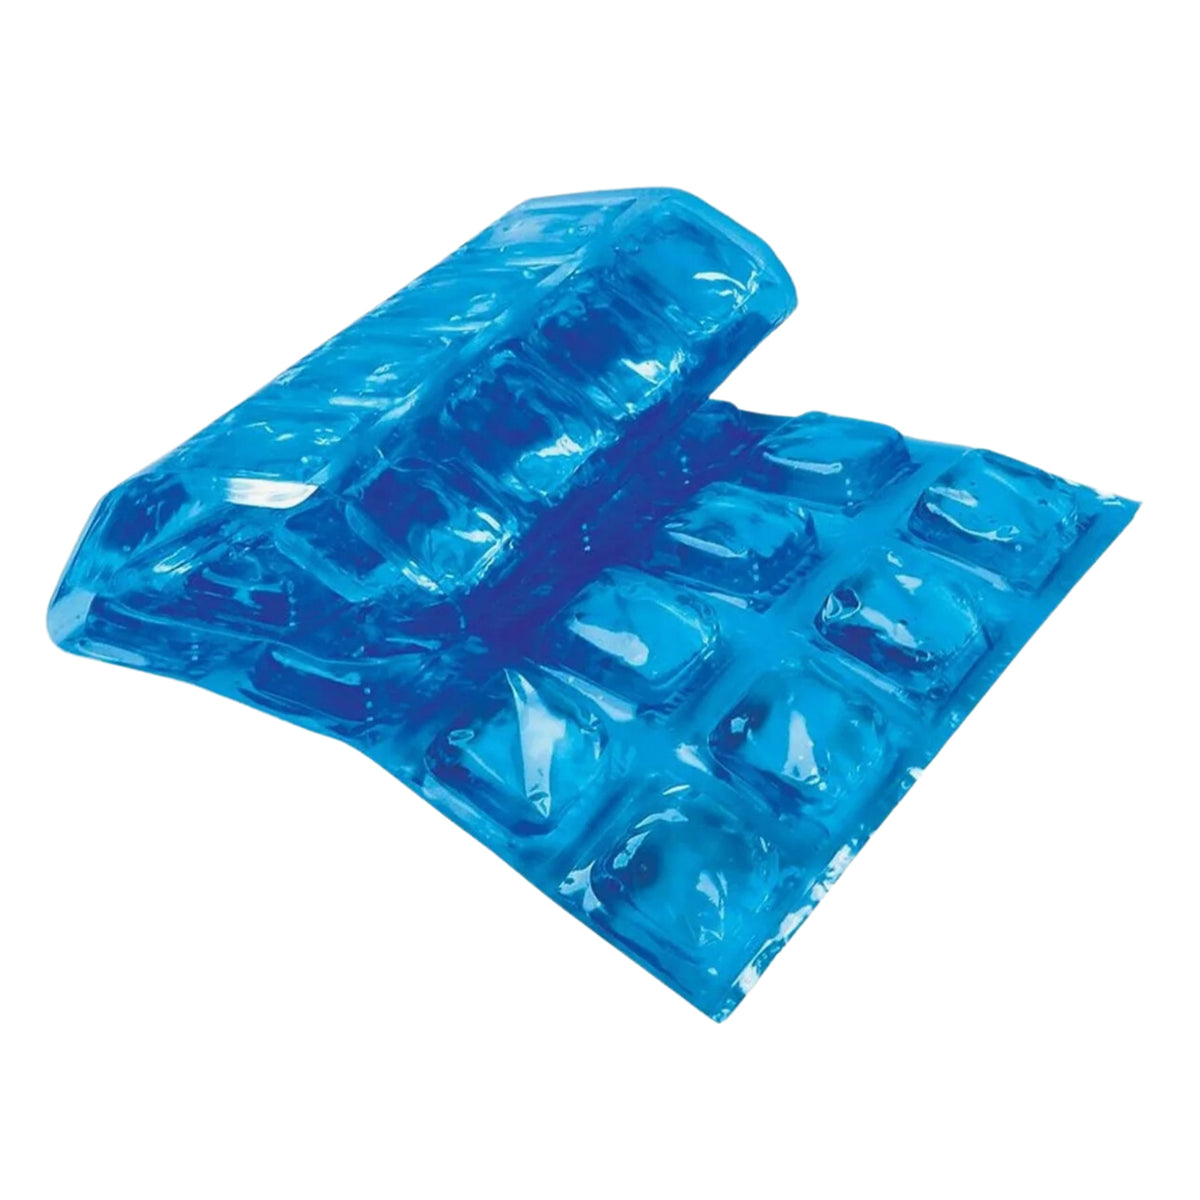 Max cold Natural Ice Sheet 88 Cube, 15 x 18.5 Inches, Blue